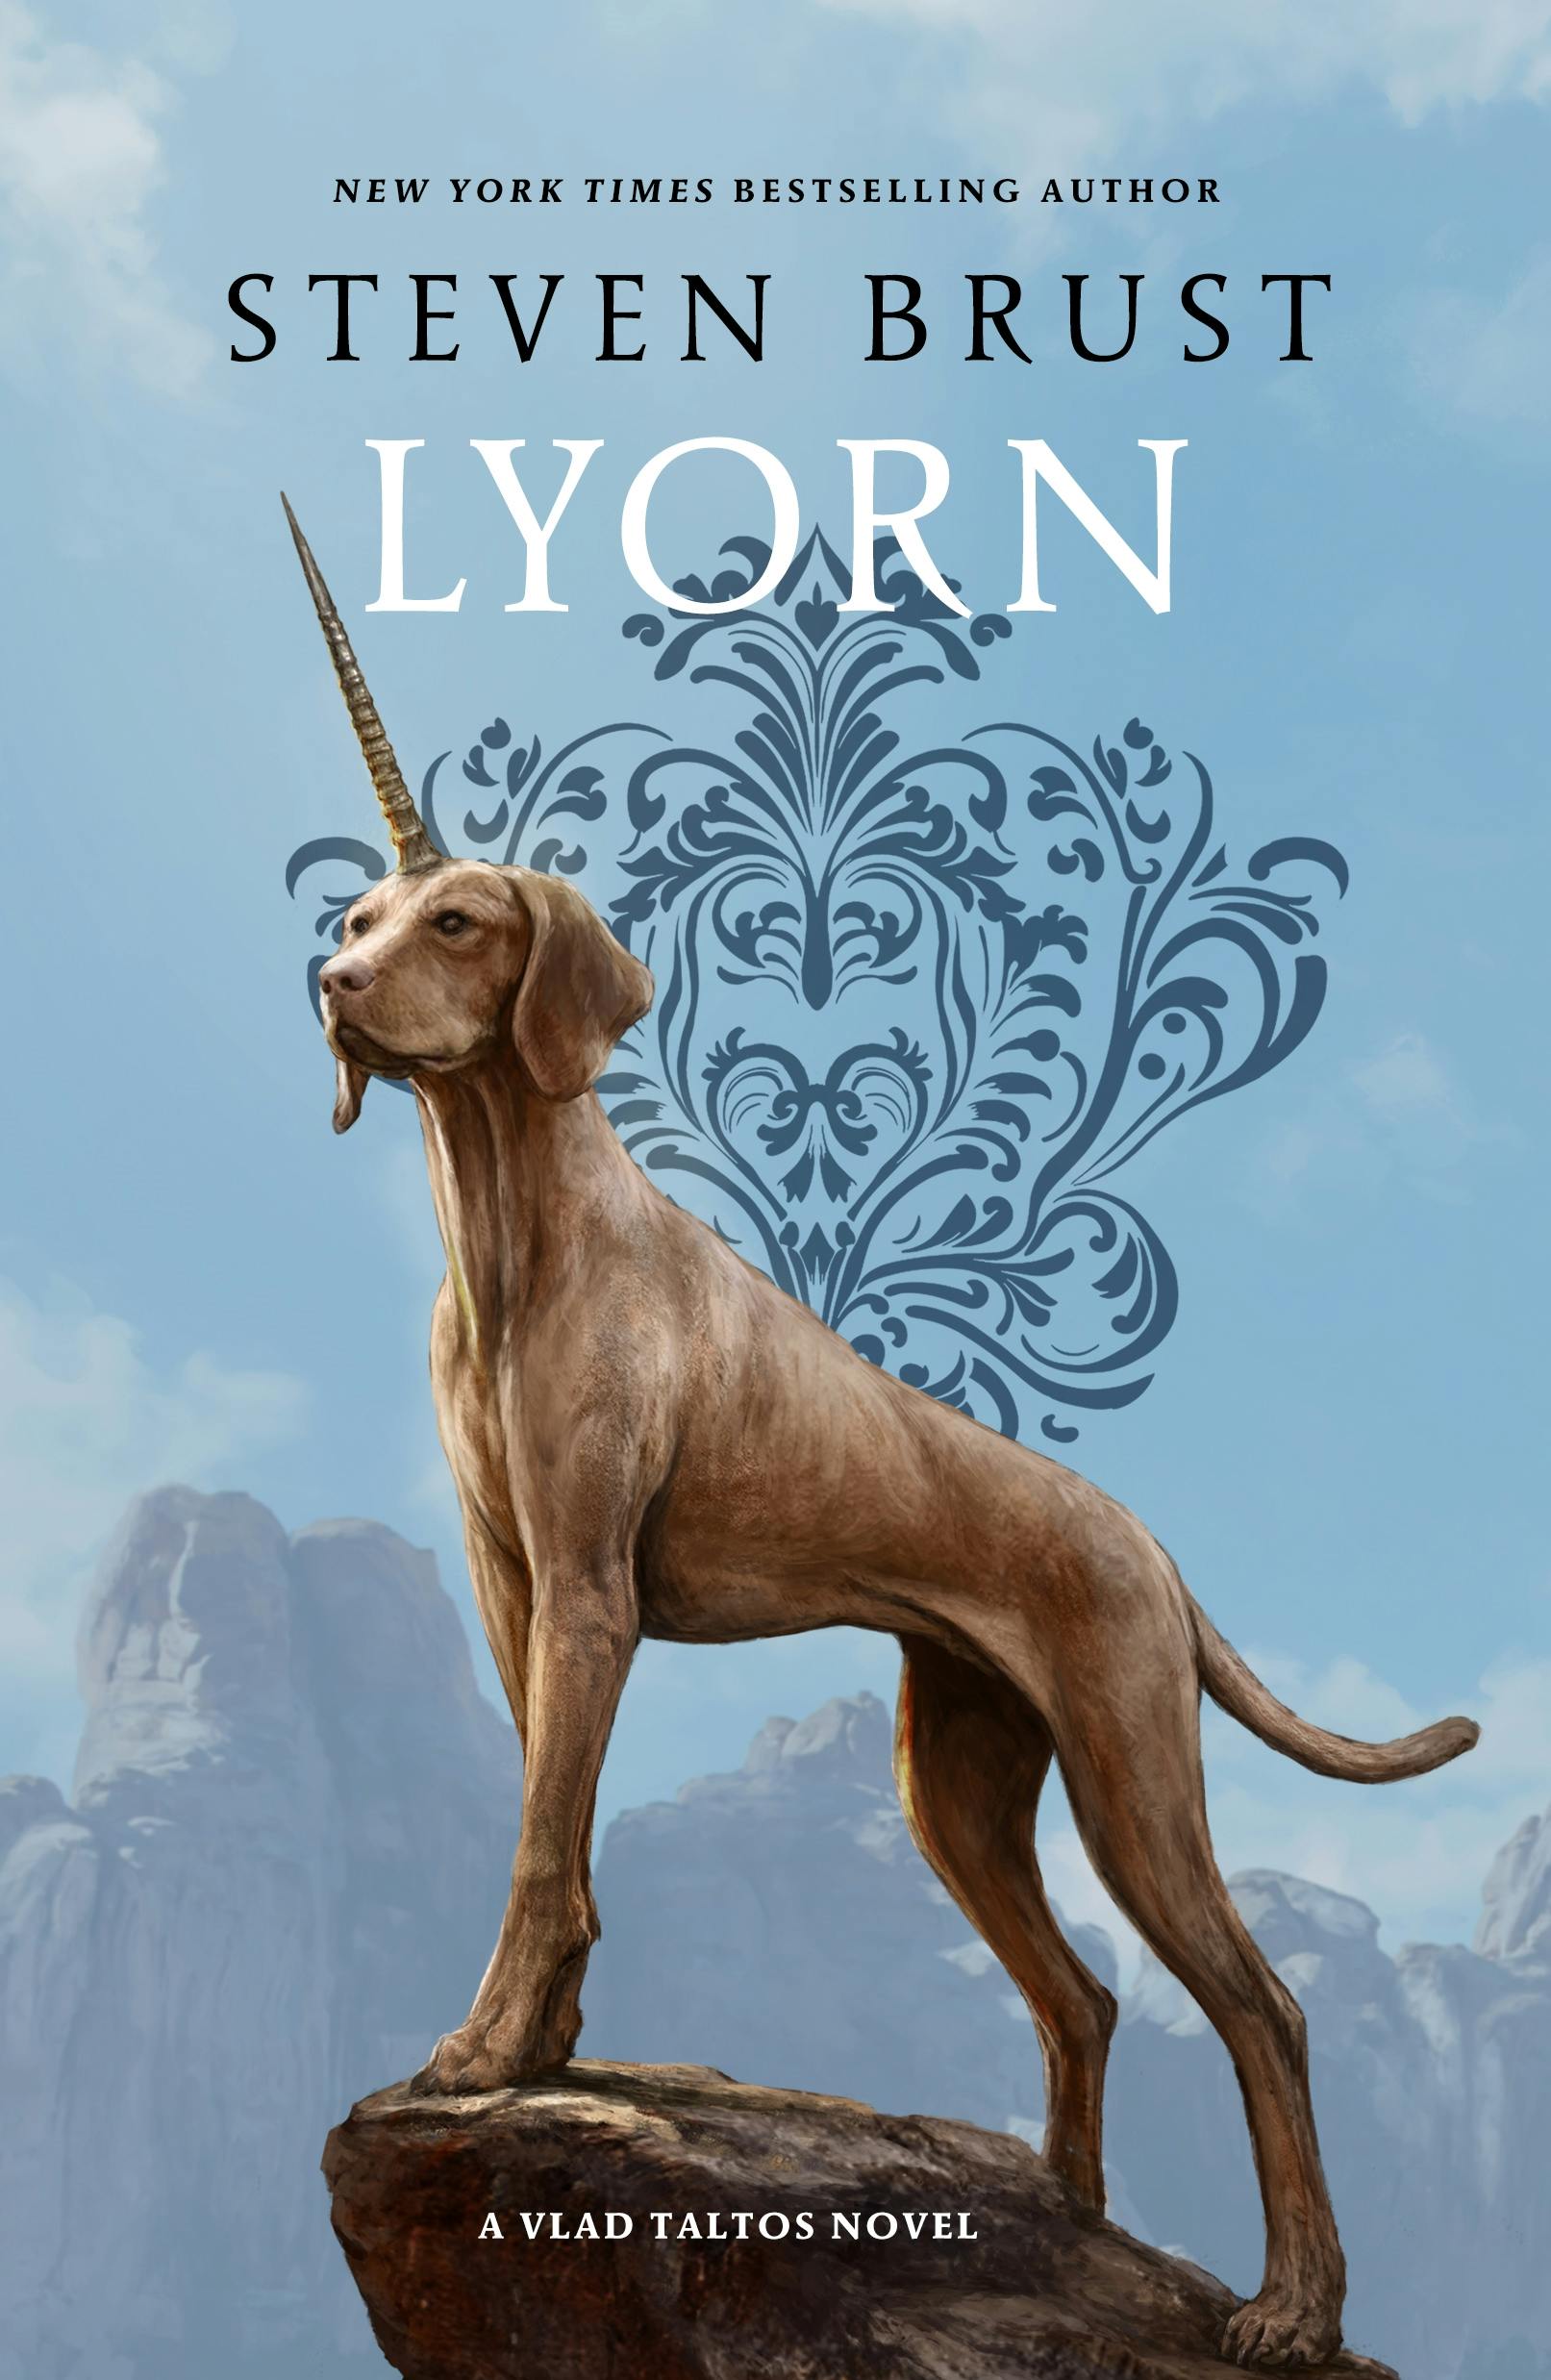 Cover for the book titled as: Lyorn